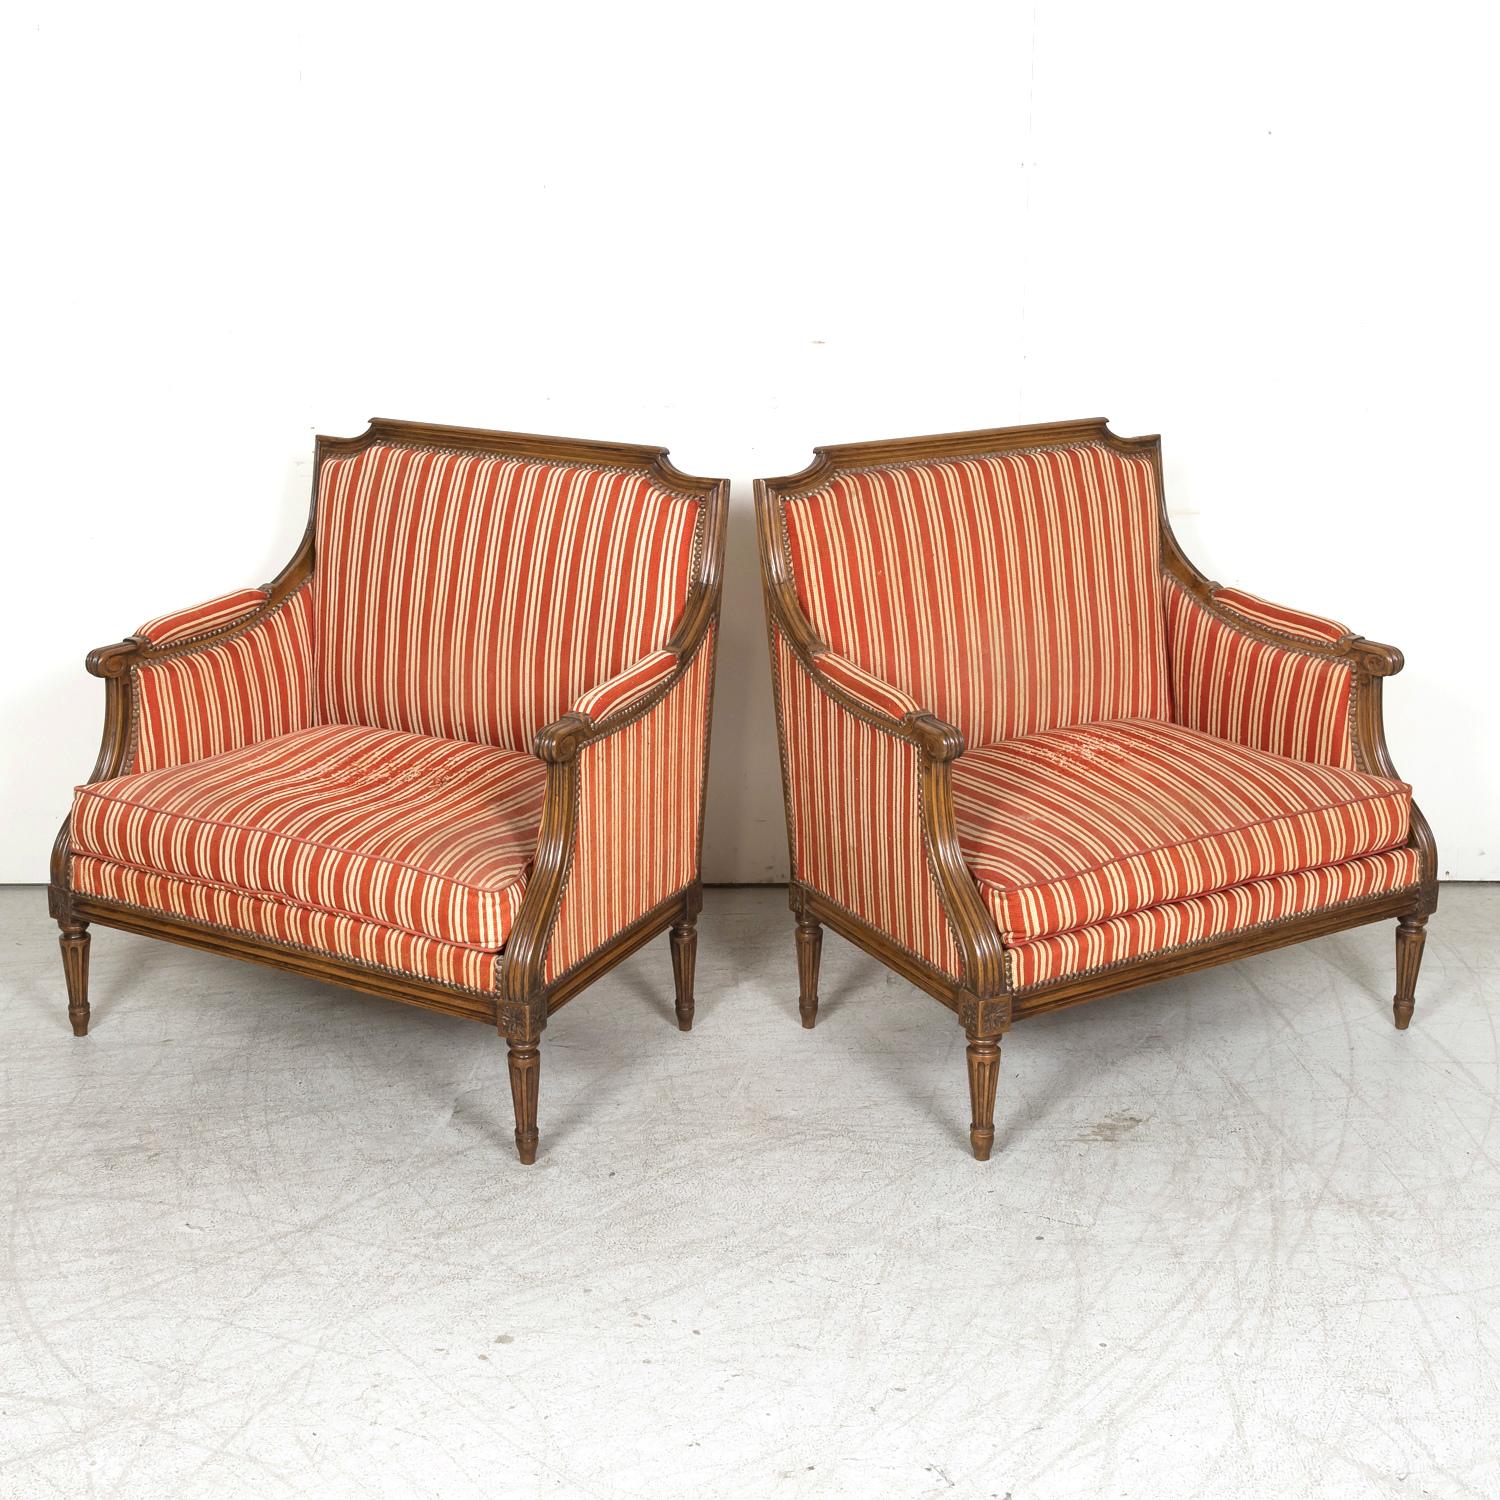 Pair of 19th Century French Louis XVI Style Oversized Bergere Marquise Armchairs For Sale 4